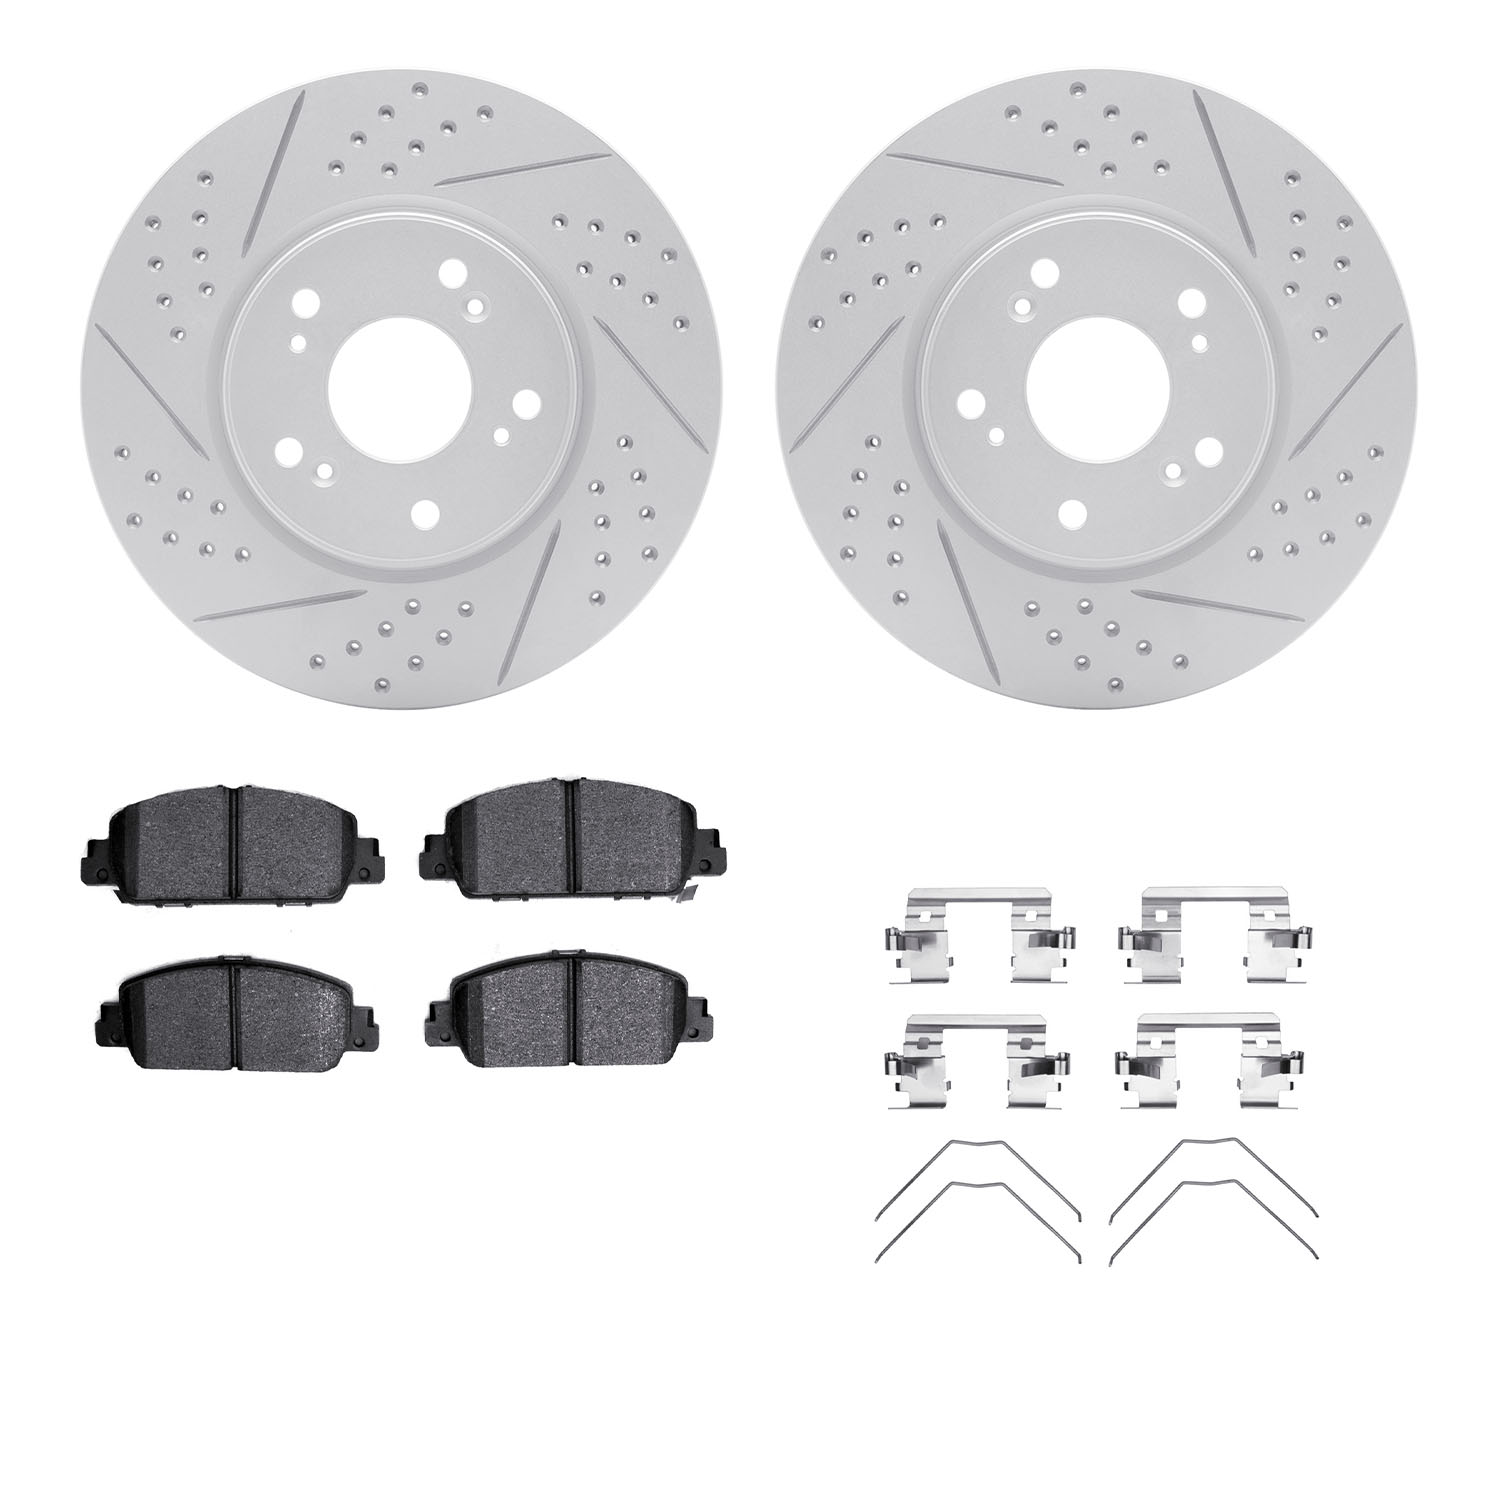 2512-59042 Geoperformance Drilled/Slotted Rotors w/5000 Advanced Brake Pads Kit & Hardware, Fits Select Acura/Honda, Position: F